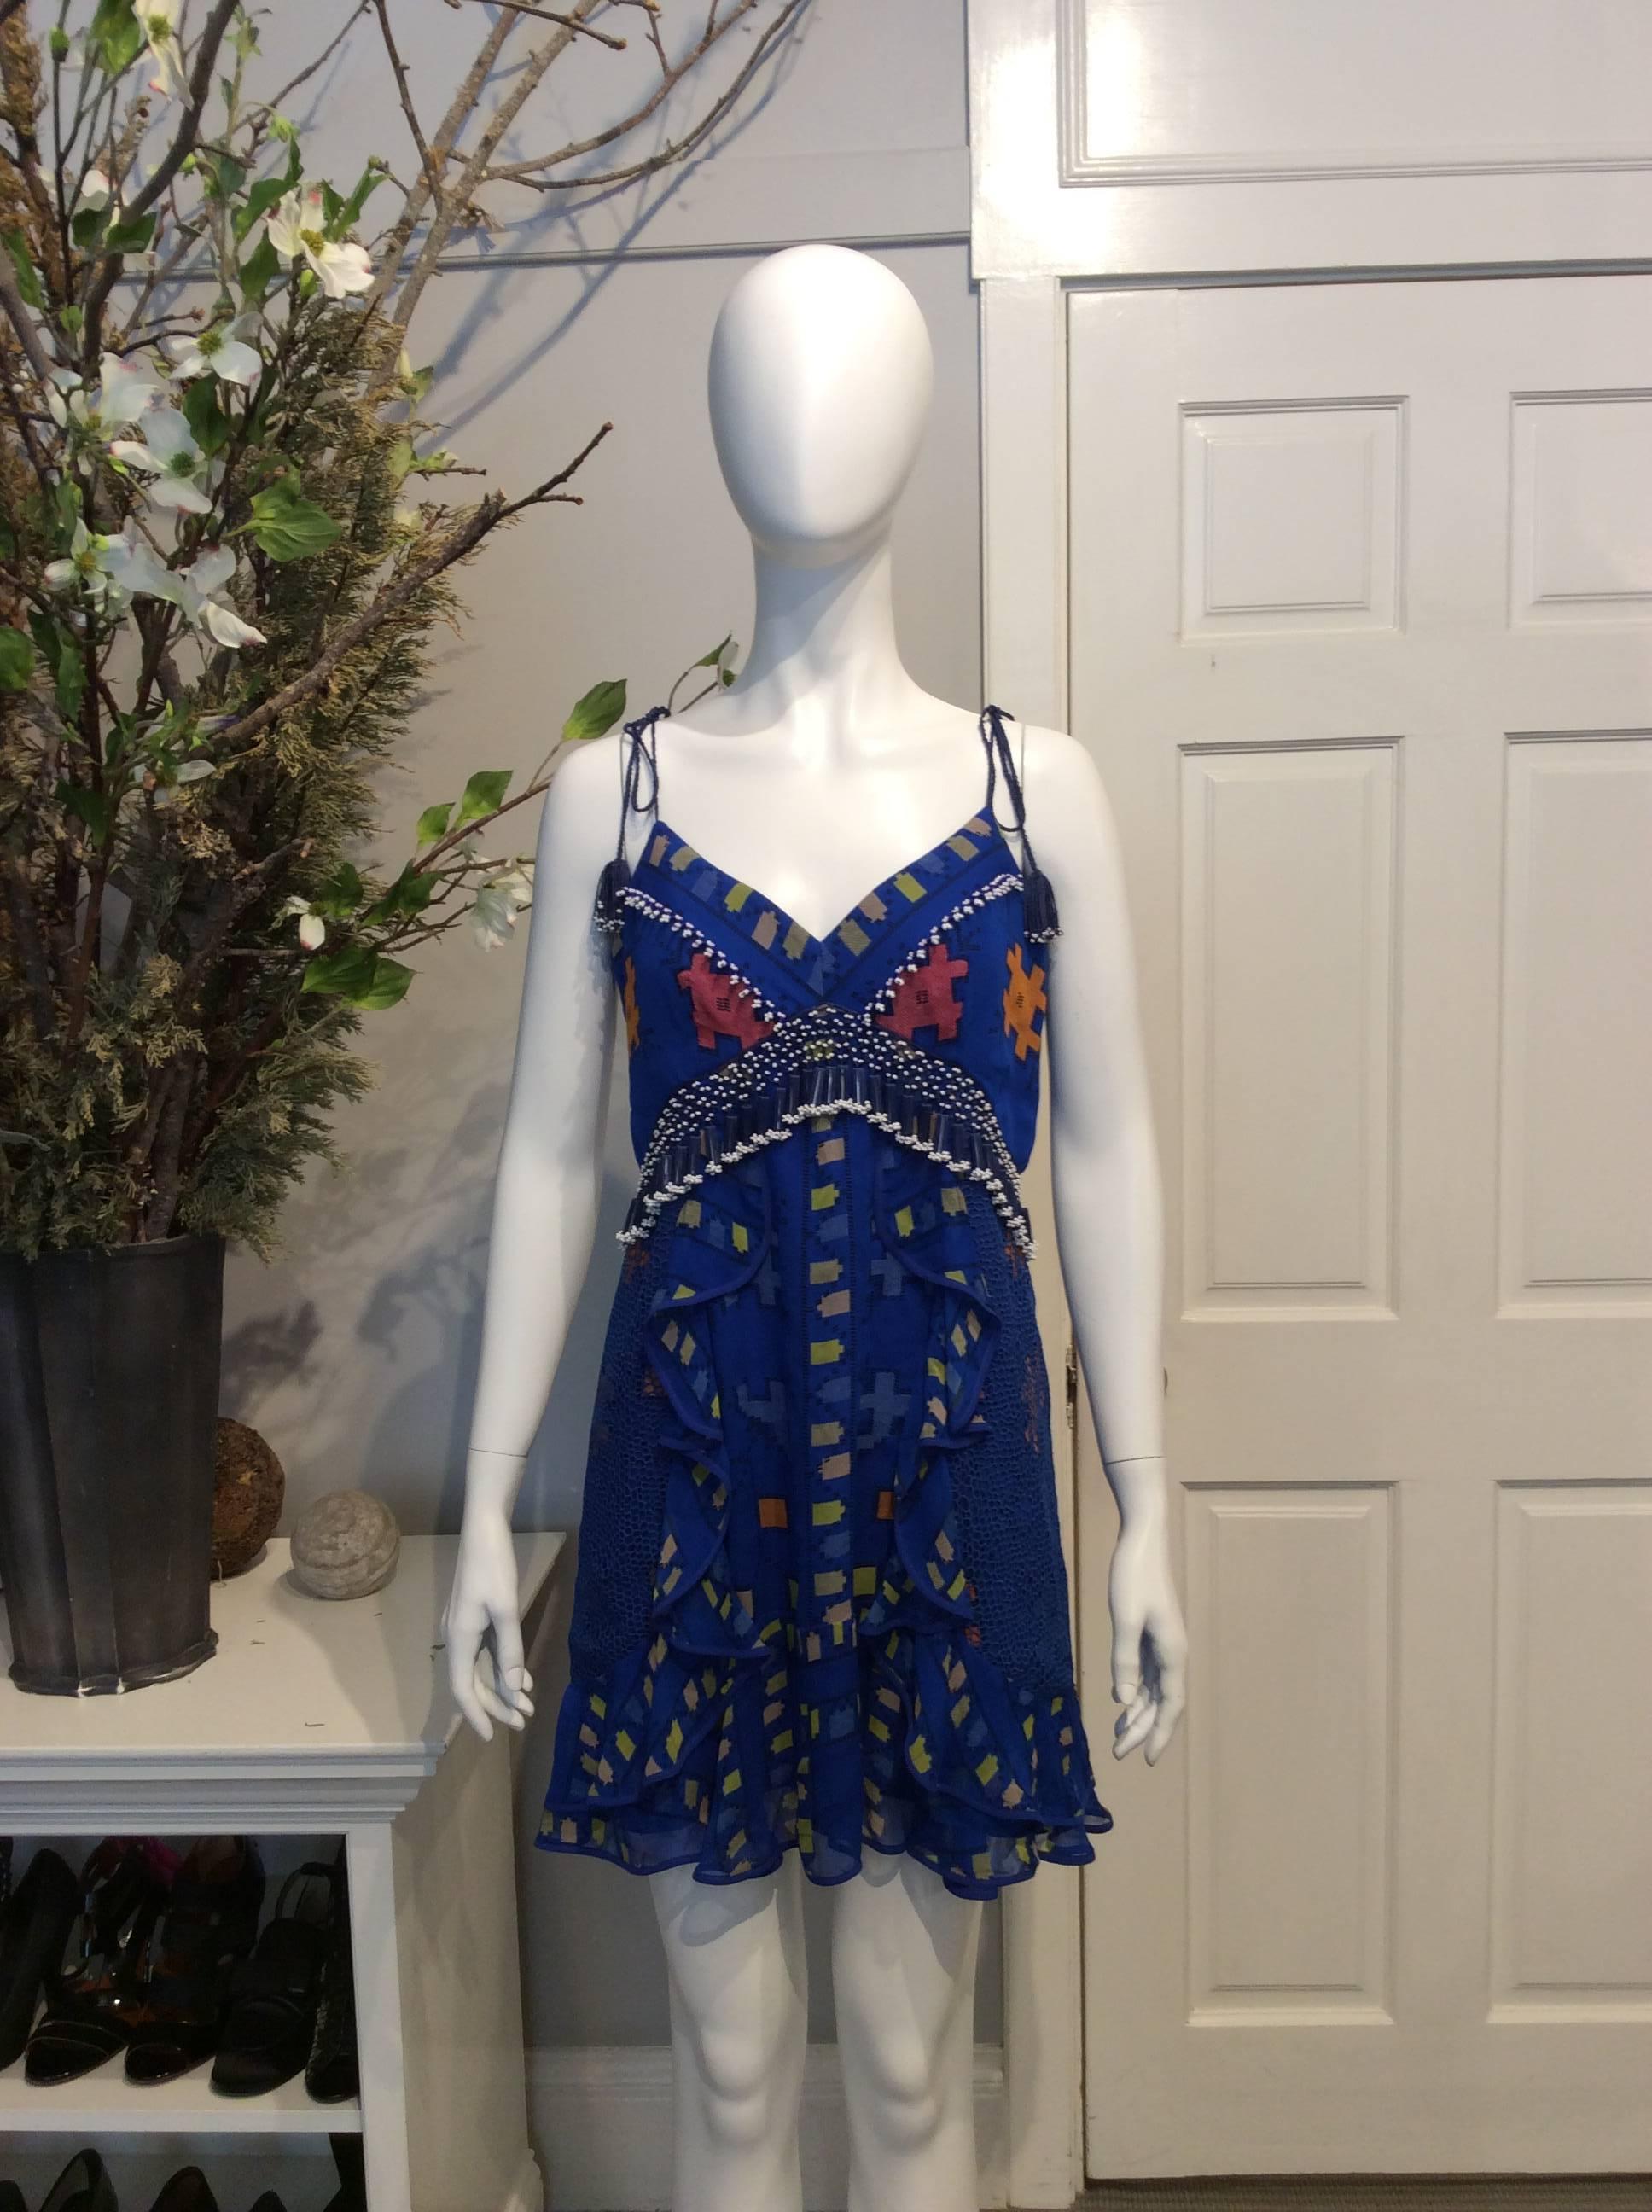 Royal Blue sleeveless dress from Istanbul-born designer, Zeynep Tosun. Drawstring straps with tassels. Tribal pattern with yellow, red, and orange. Blue and white tasseled beading on bust and looping around to the back of dress. Zipper and single